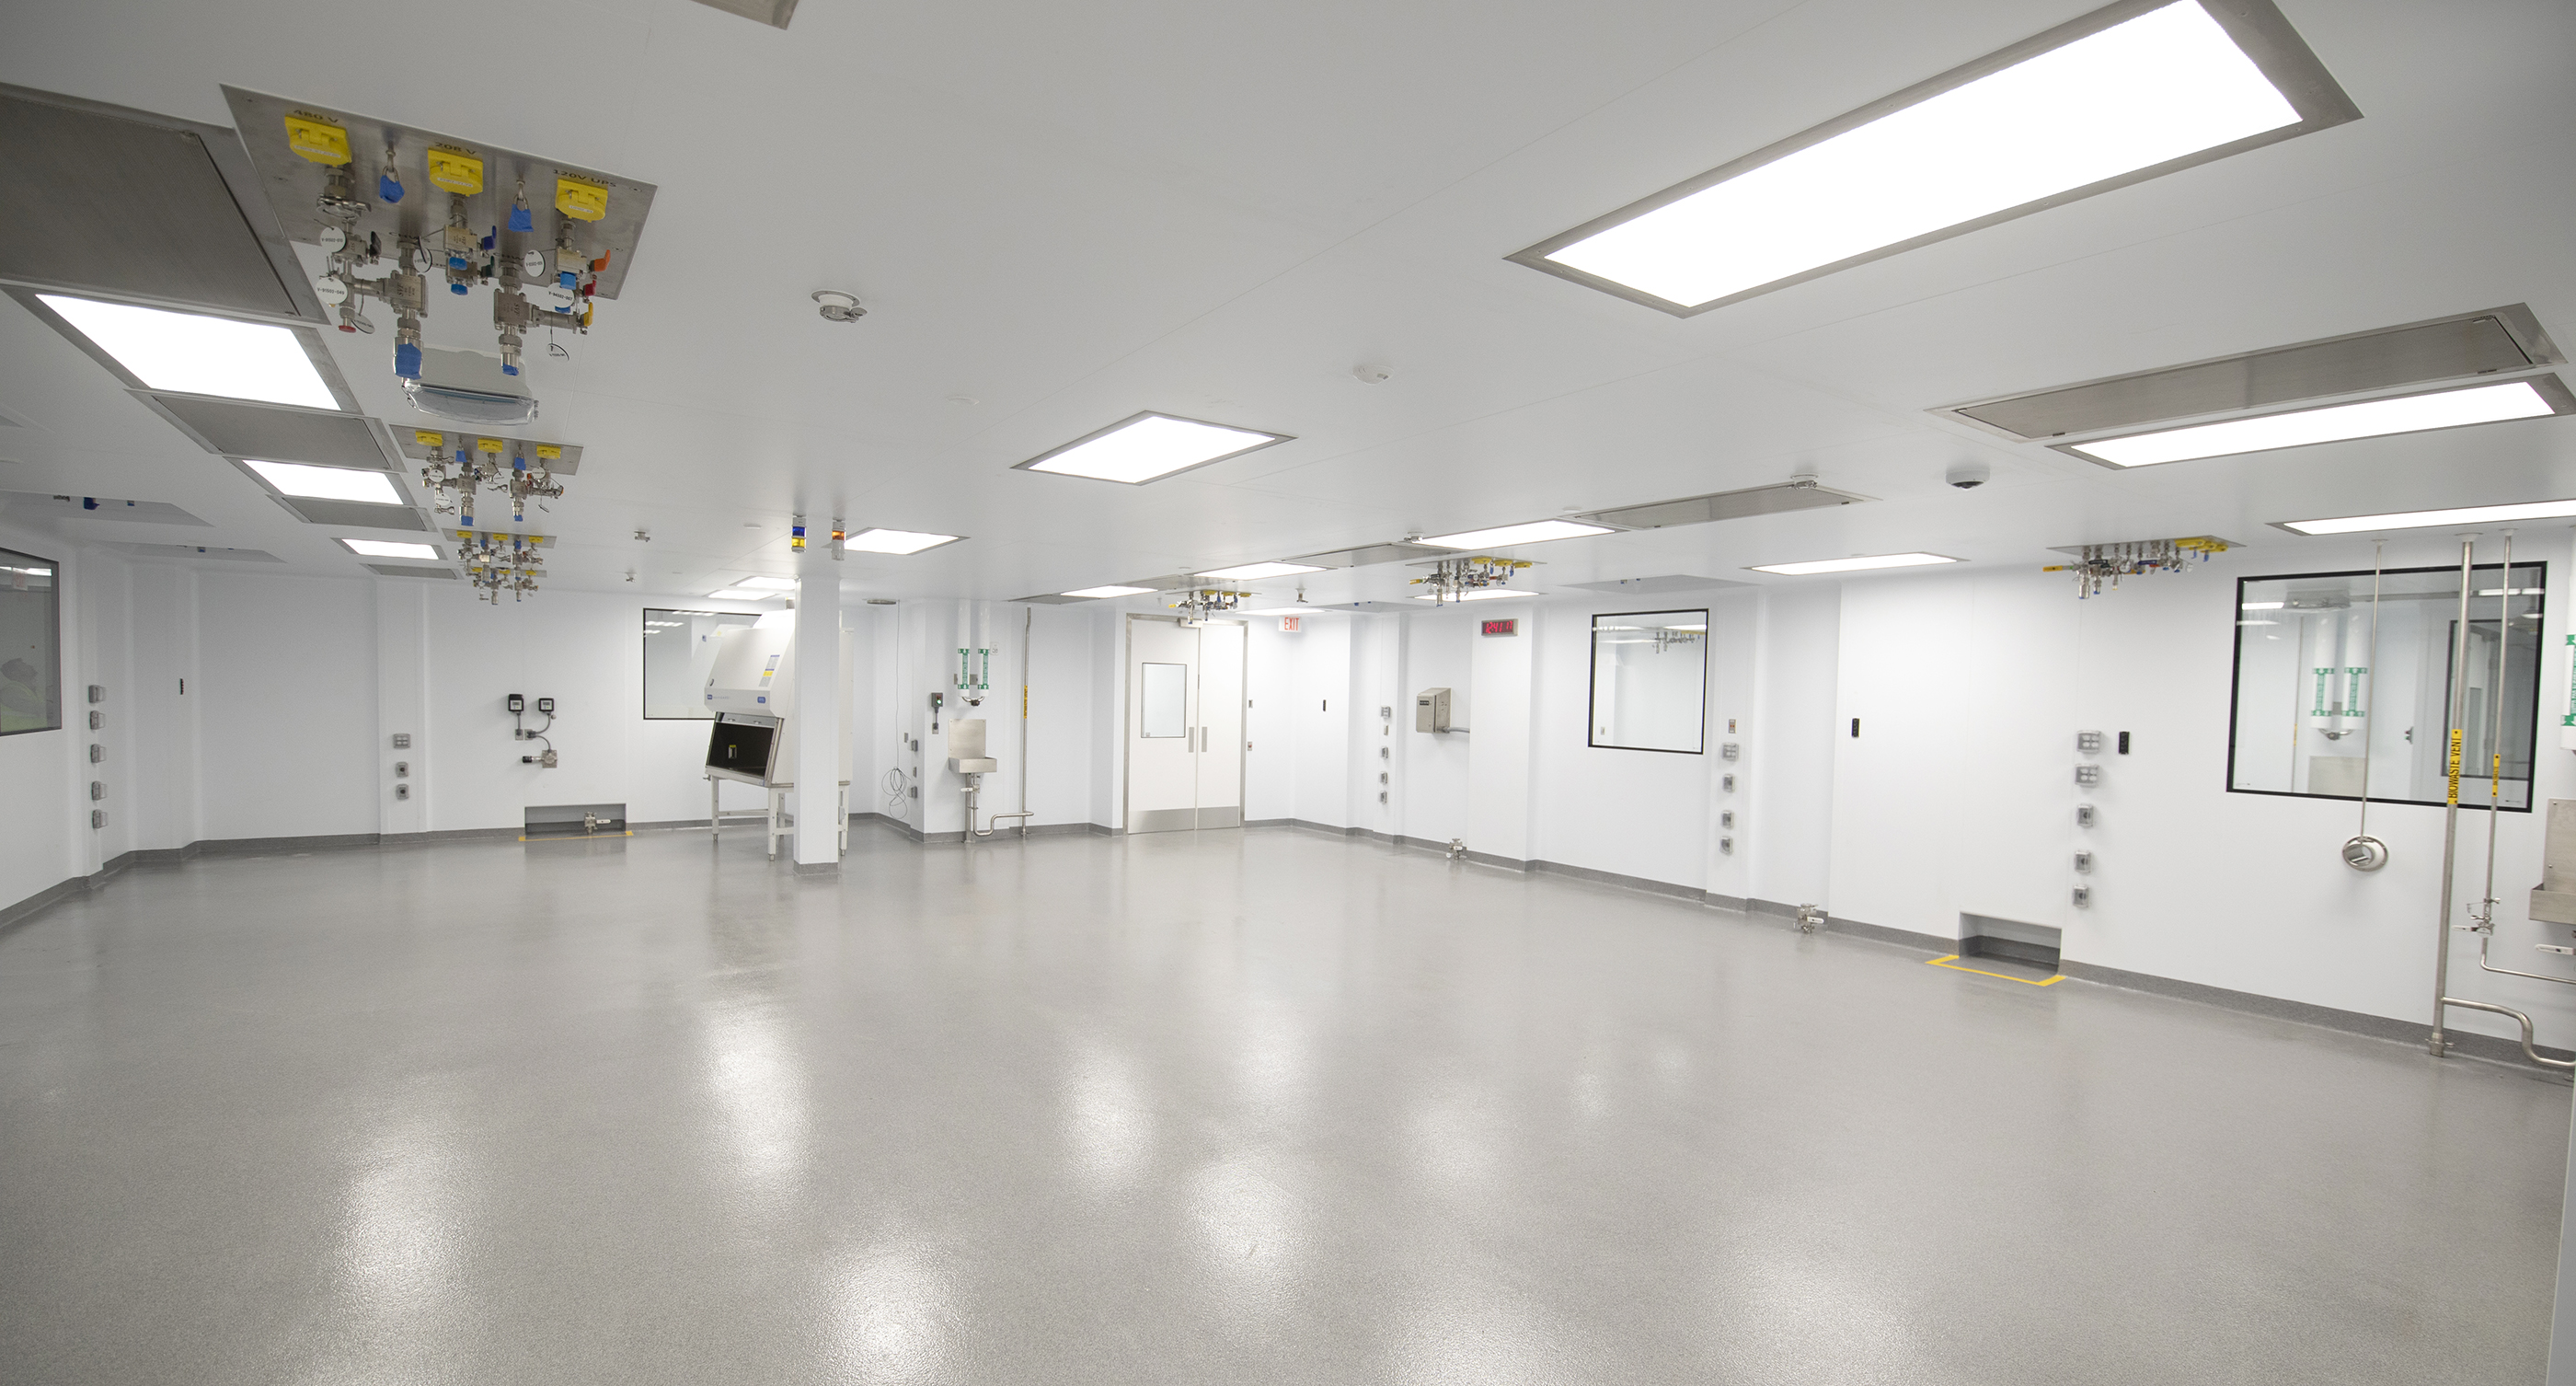 Case 2: Cleanroom inserted into existing tight space building with non-walkable ceiling.